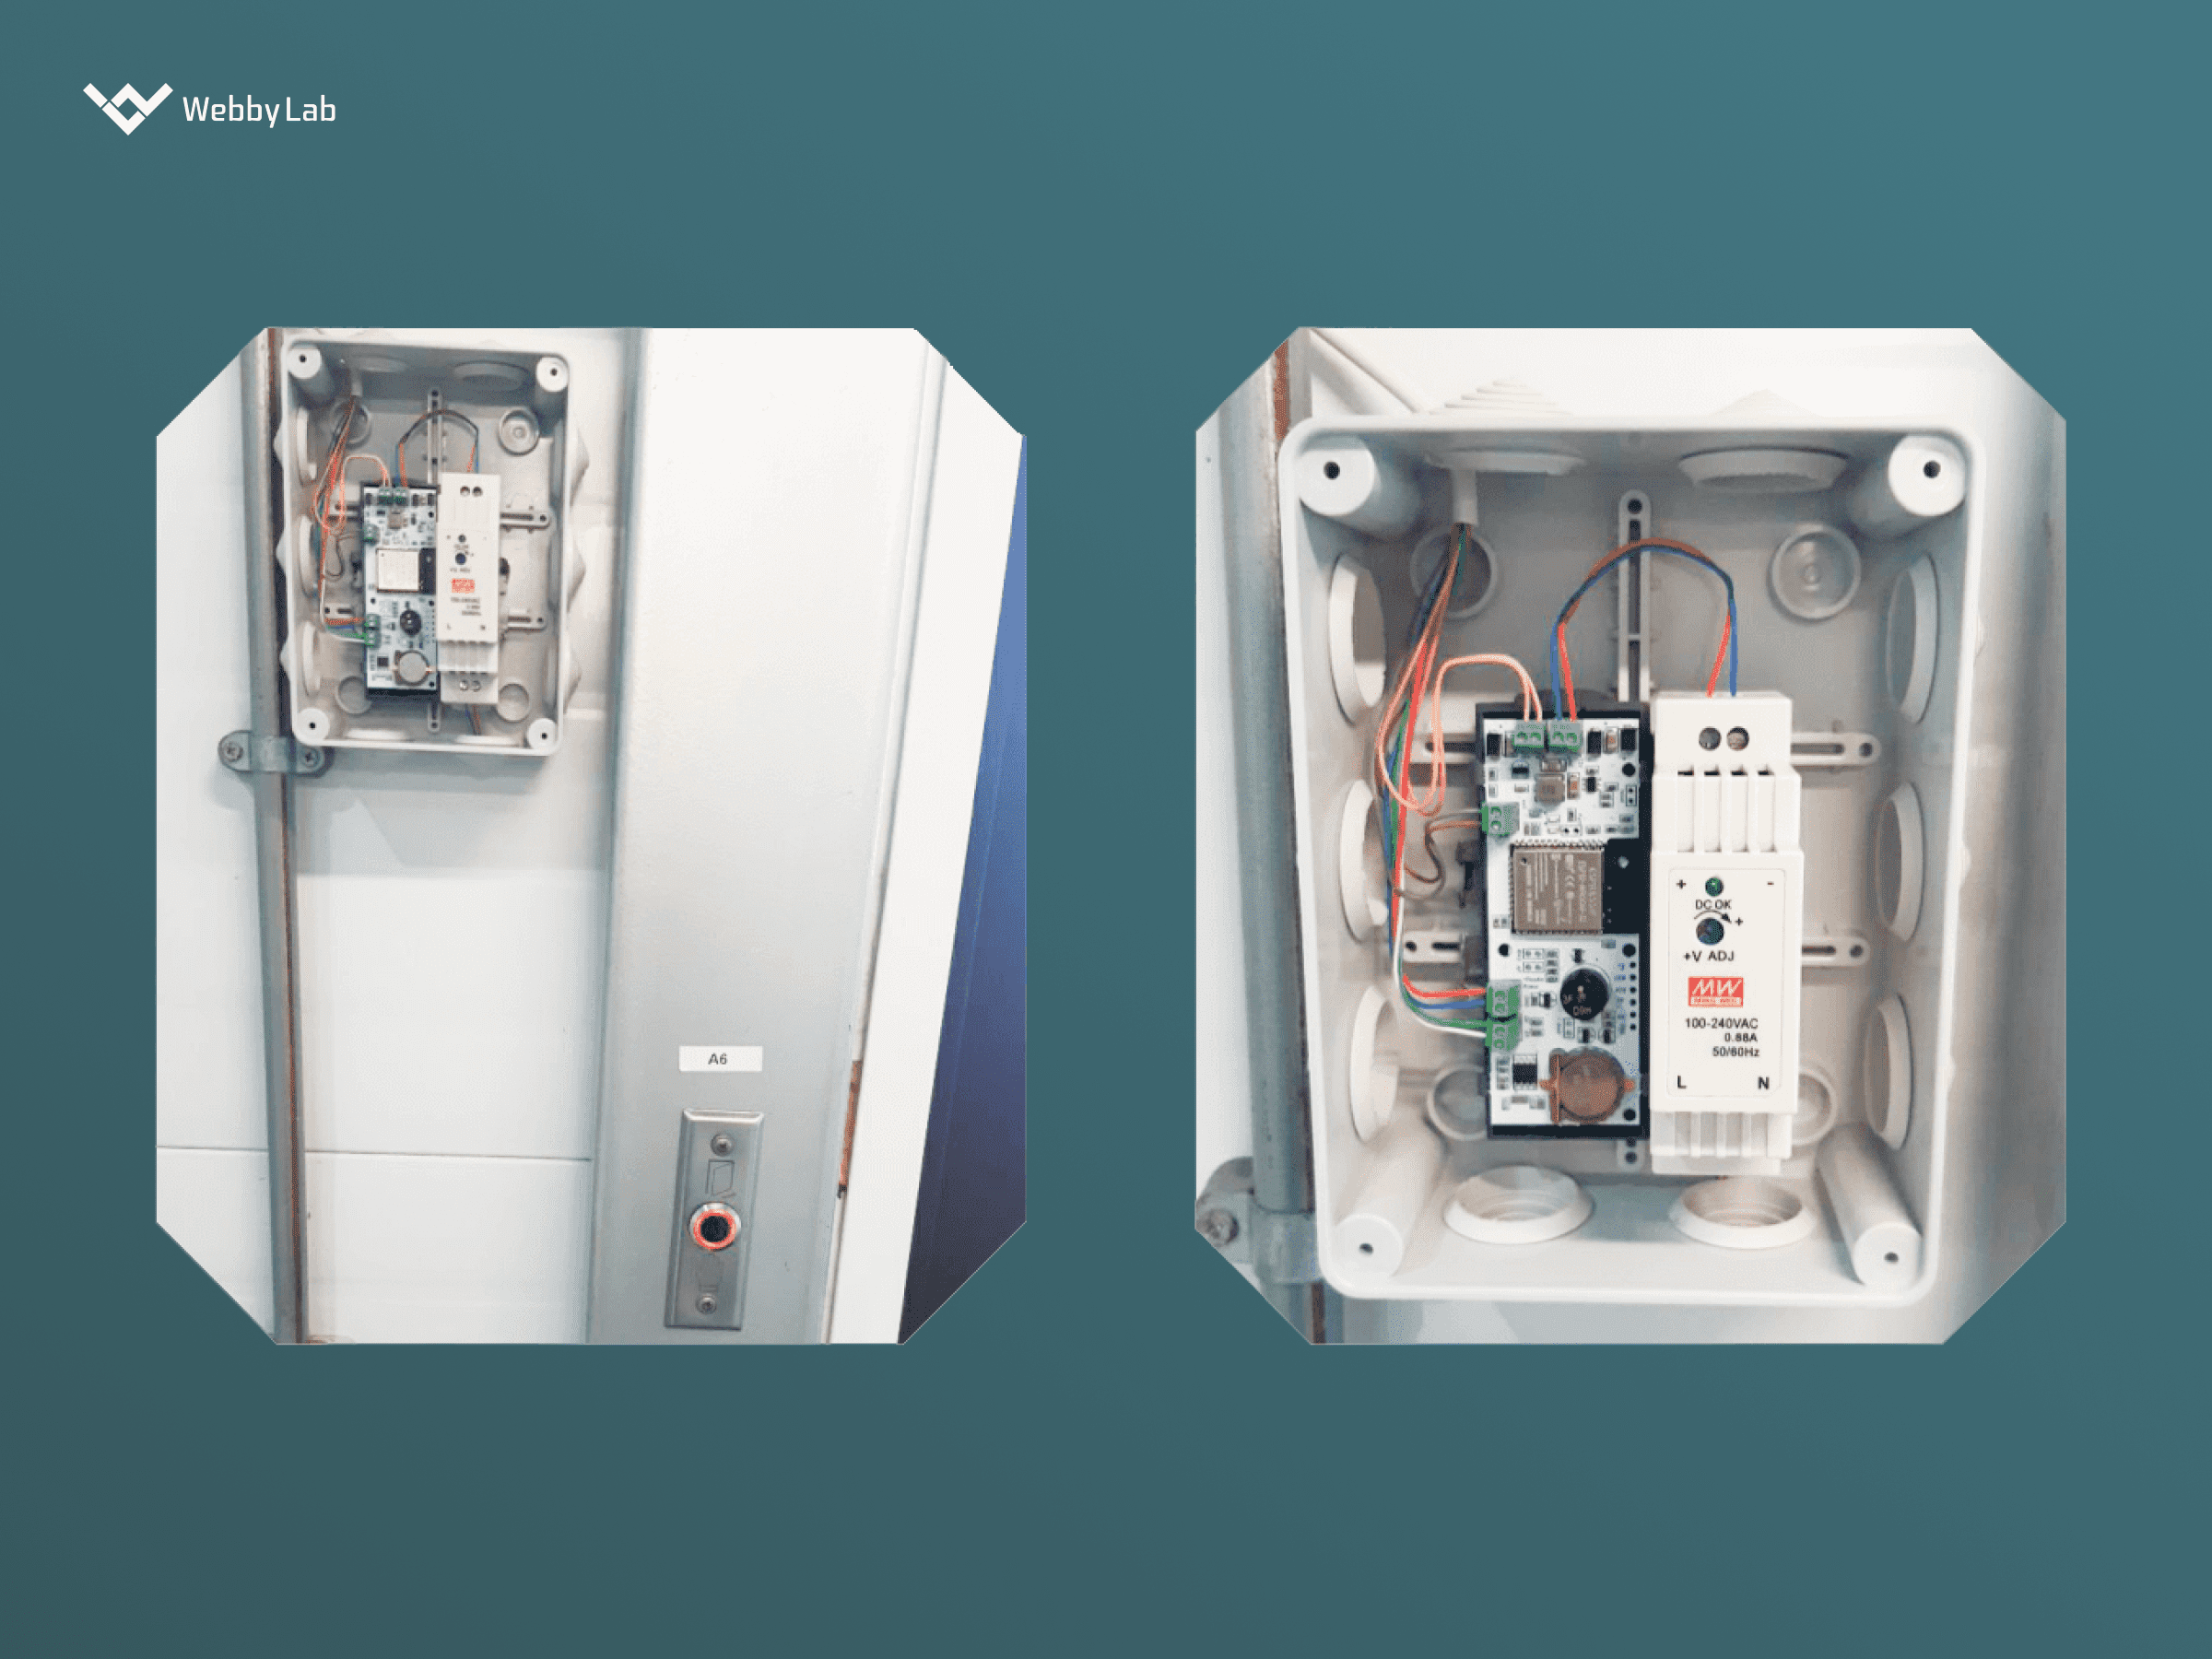 The Propuskator access control system’s controllers assembled by WebbyLab.